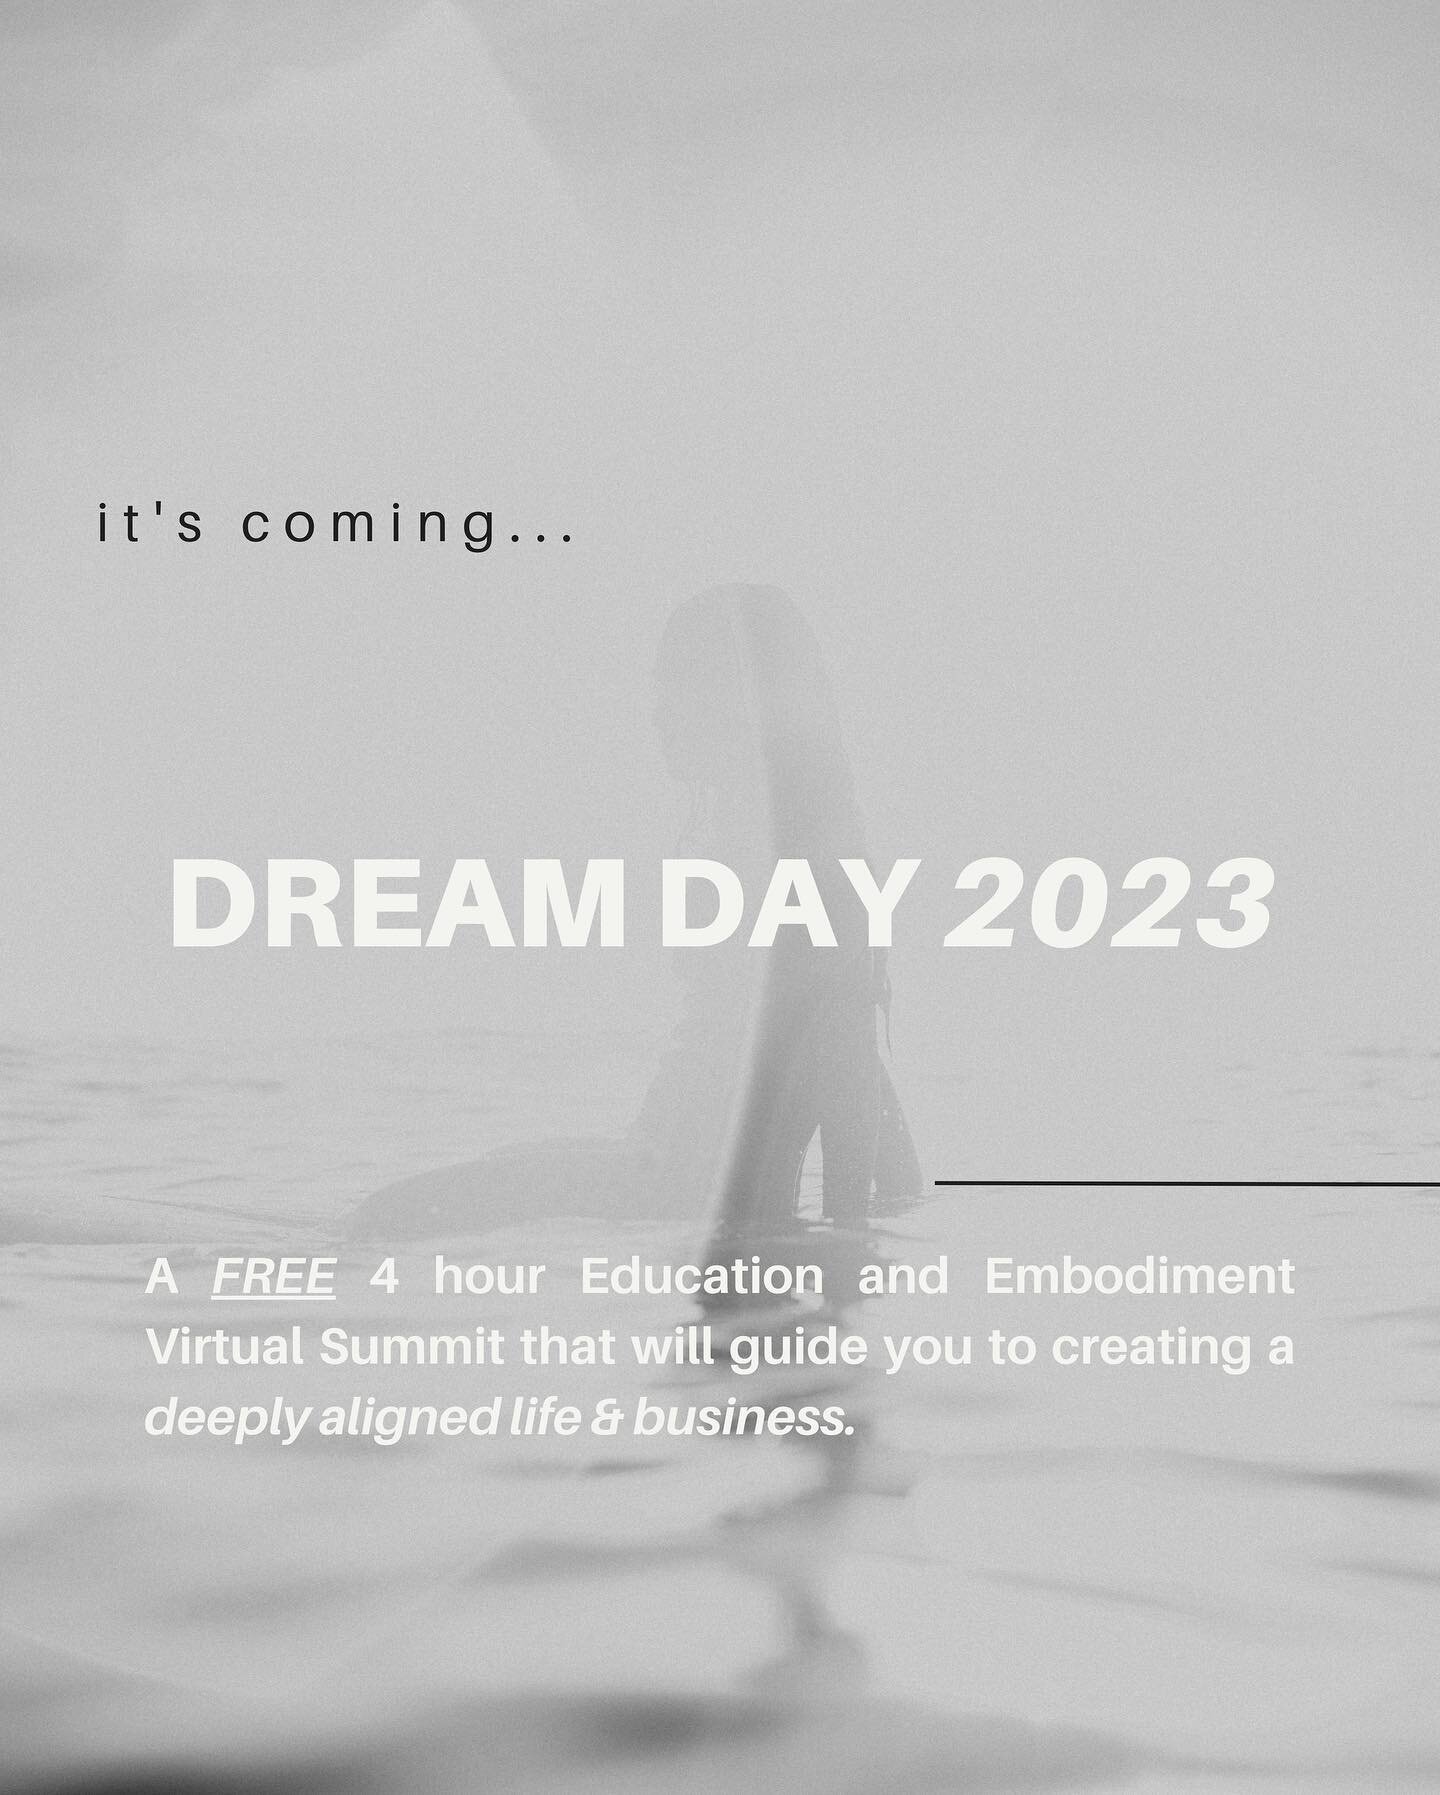 Dream Day 2023 registration is OFFICIALLY open🥳

Swipe to learn more about what the day includes👉🏼

Dream Day is crafted to quantum leap you through the blocks and beliefs you&rsquo;re holding and guide you to building a fully aligned business. To